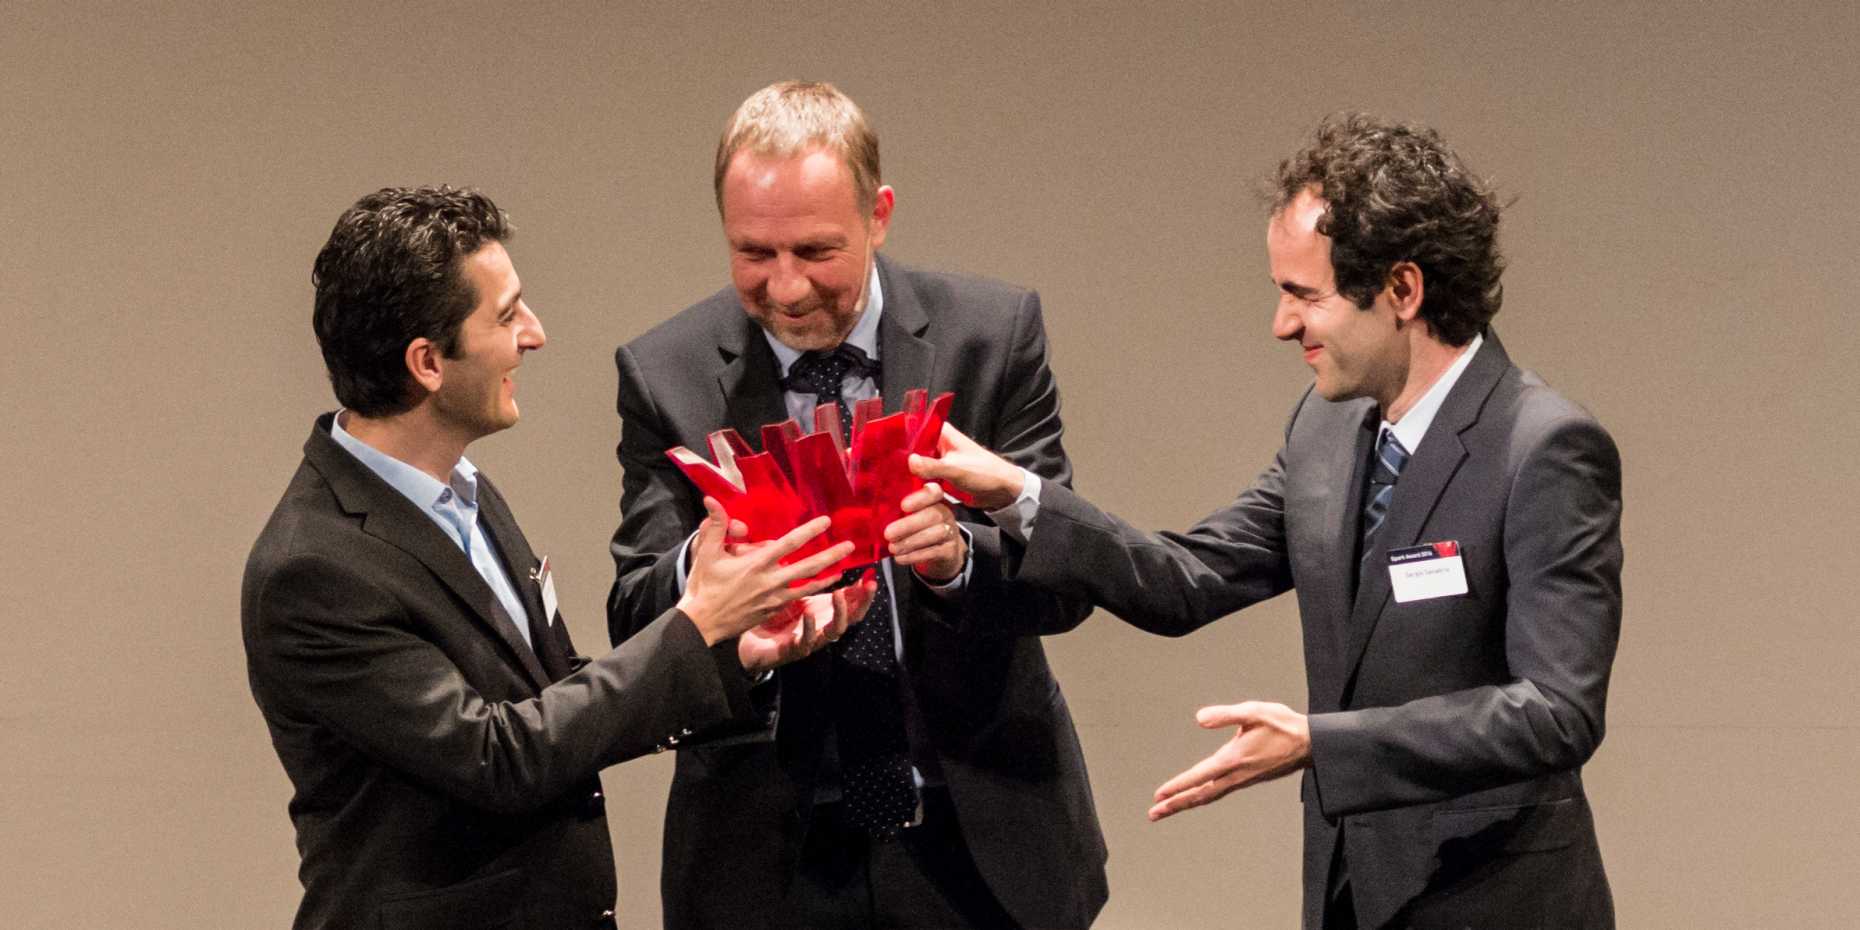 Enlarged view: ETH Vice President Detlef Günther (middle) with the winners of the Spark Award 2016, Orçun Göksel (left) and Sergio Sanabria (right). (Photo: ETH Zurich / Oliver Bartenschlager)